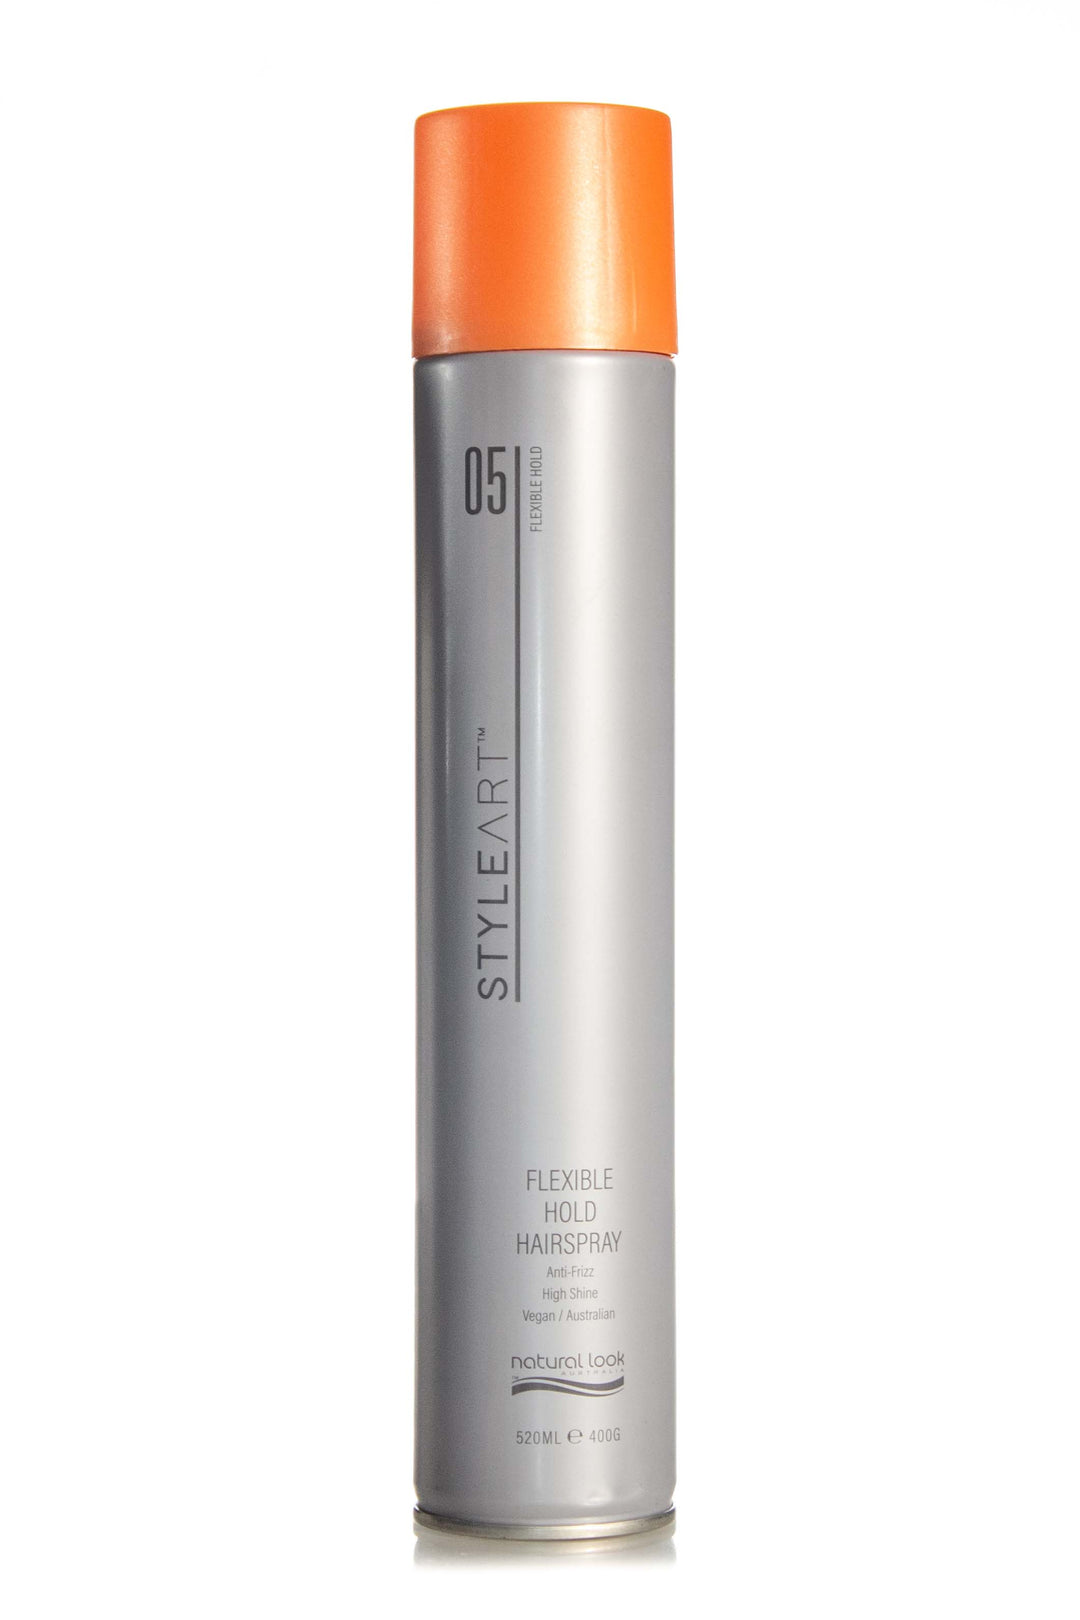 NATURAL LOOK STYLEART FLEXIBLE HOLD HAIRSPRAY ANTI-FRIZZ 400G